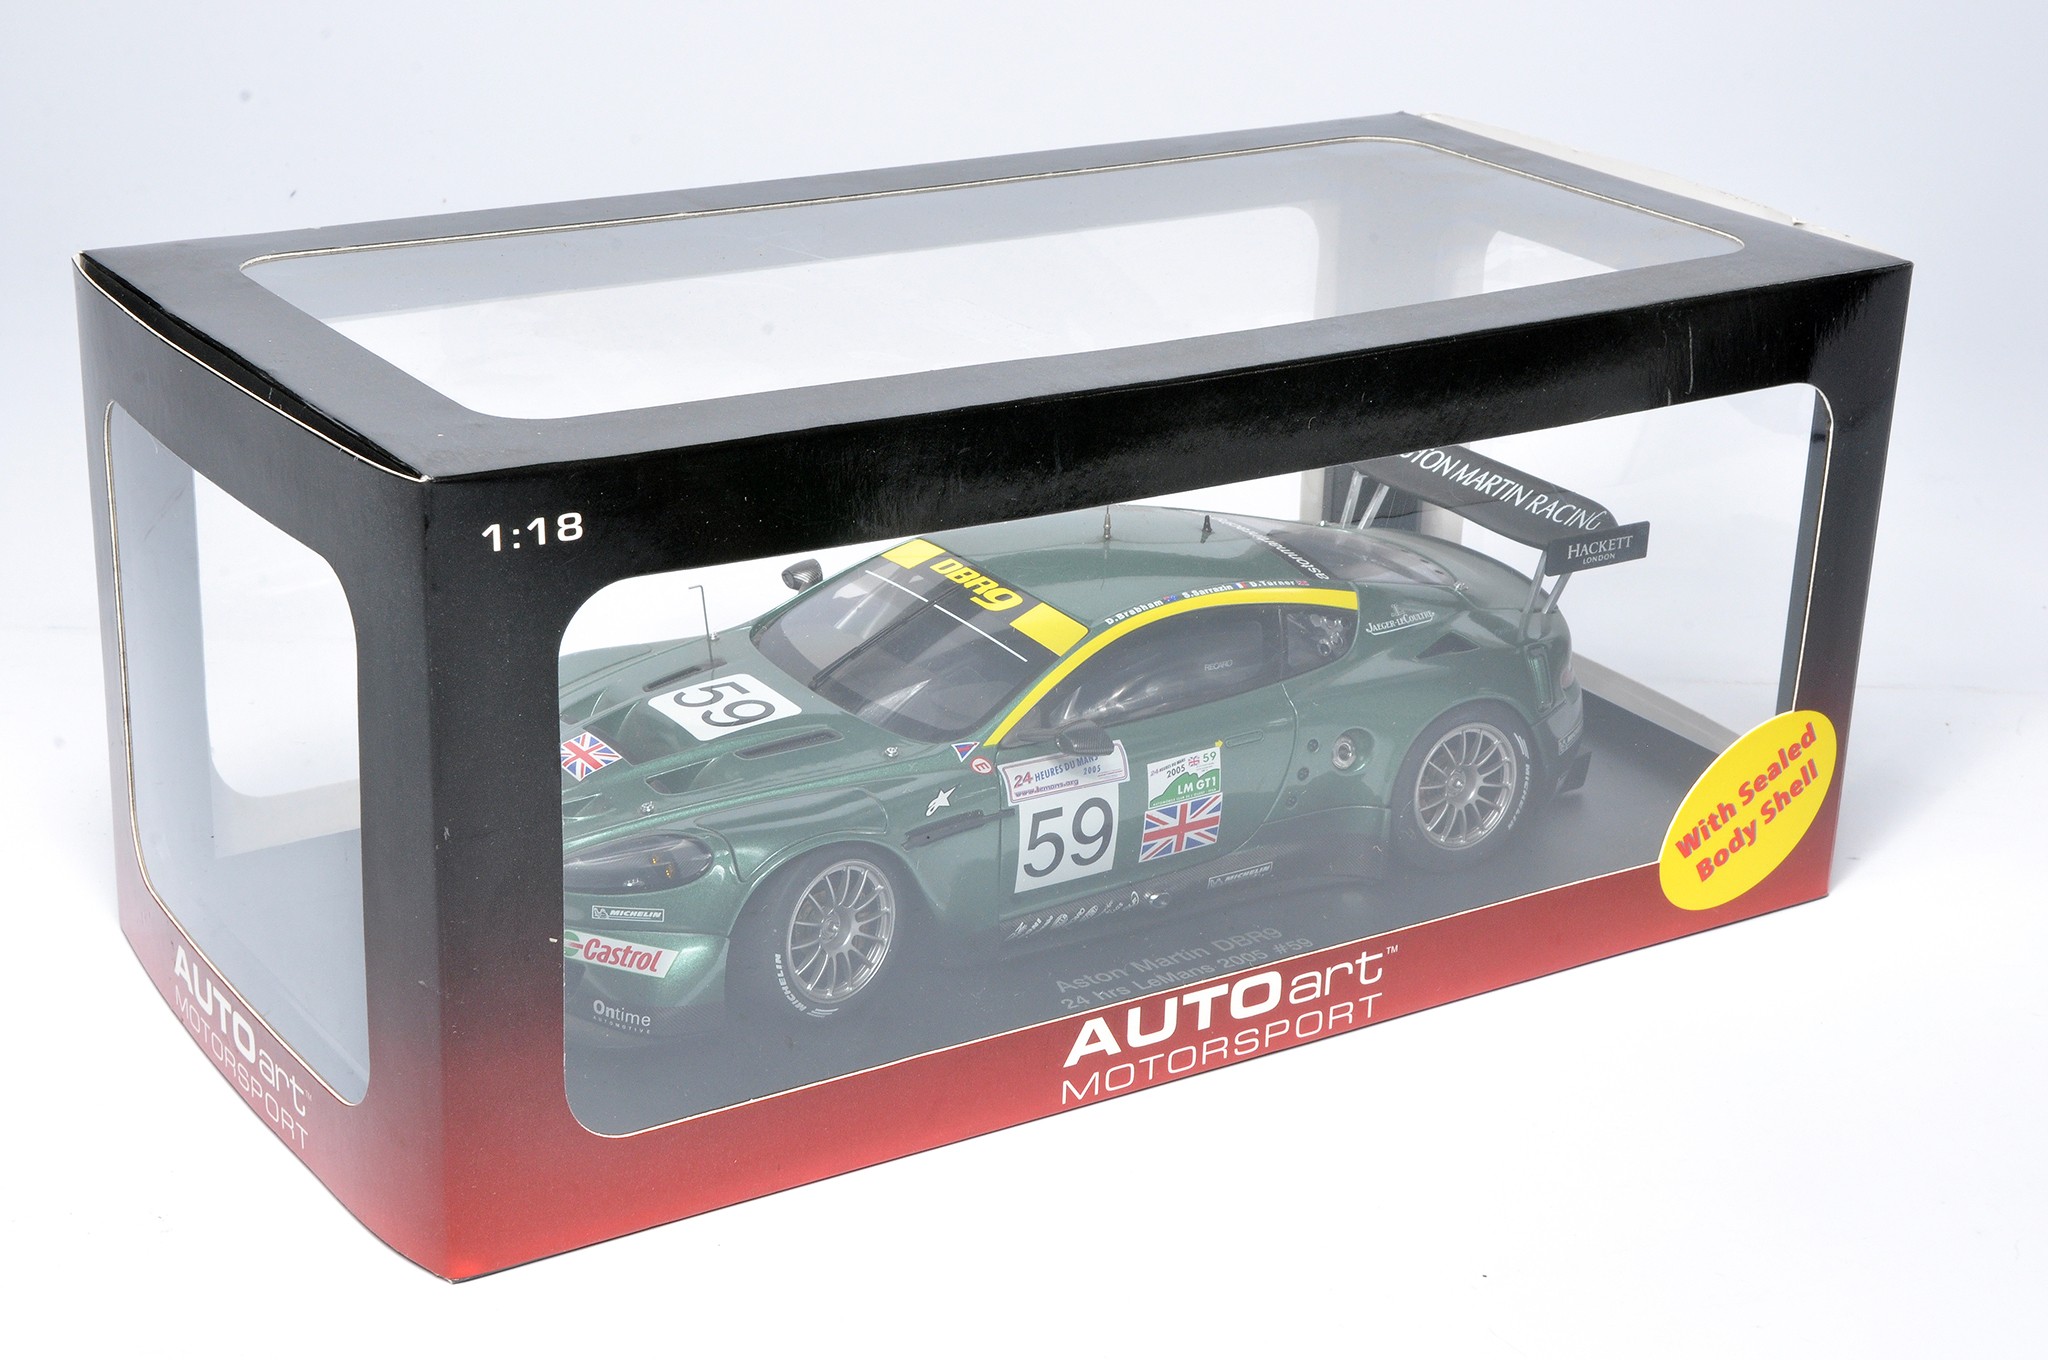 Autoart 1/18 diecast model racing car issue comprising Aston Martin DBR9 Le Mans 2005. Looks to be